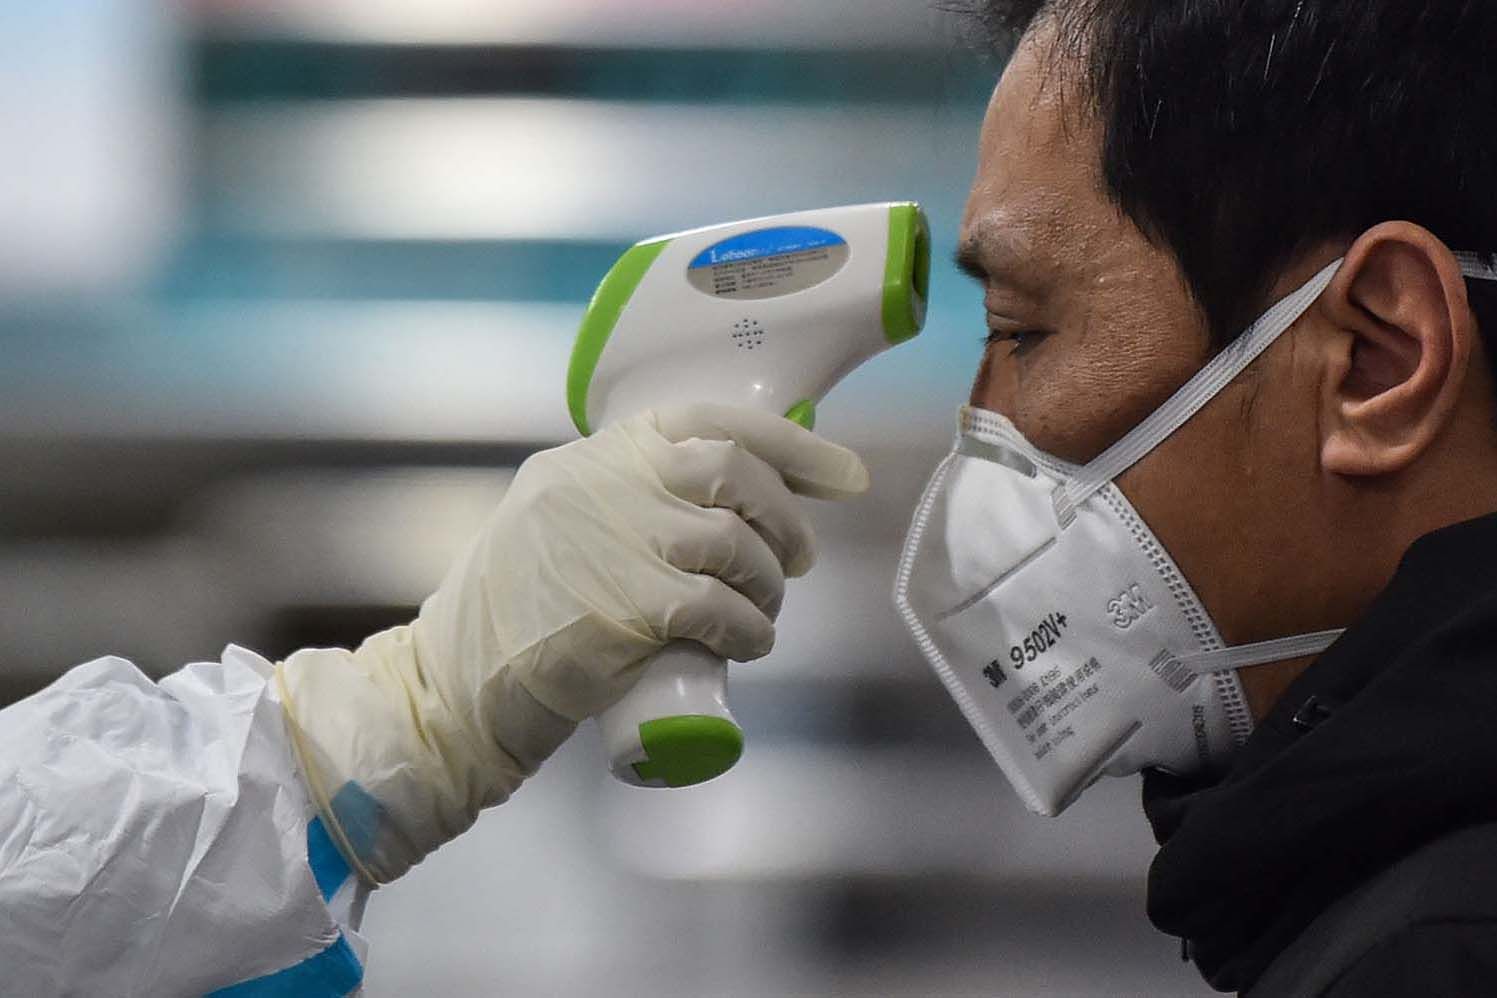 Man gets temperature taken for Covid 19 testing in China